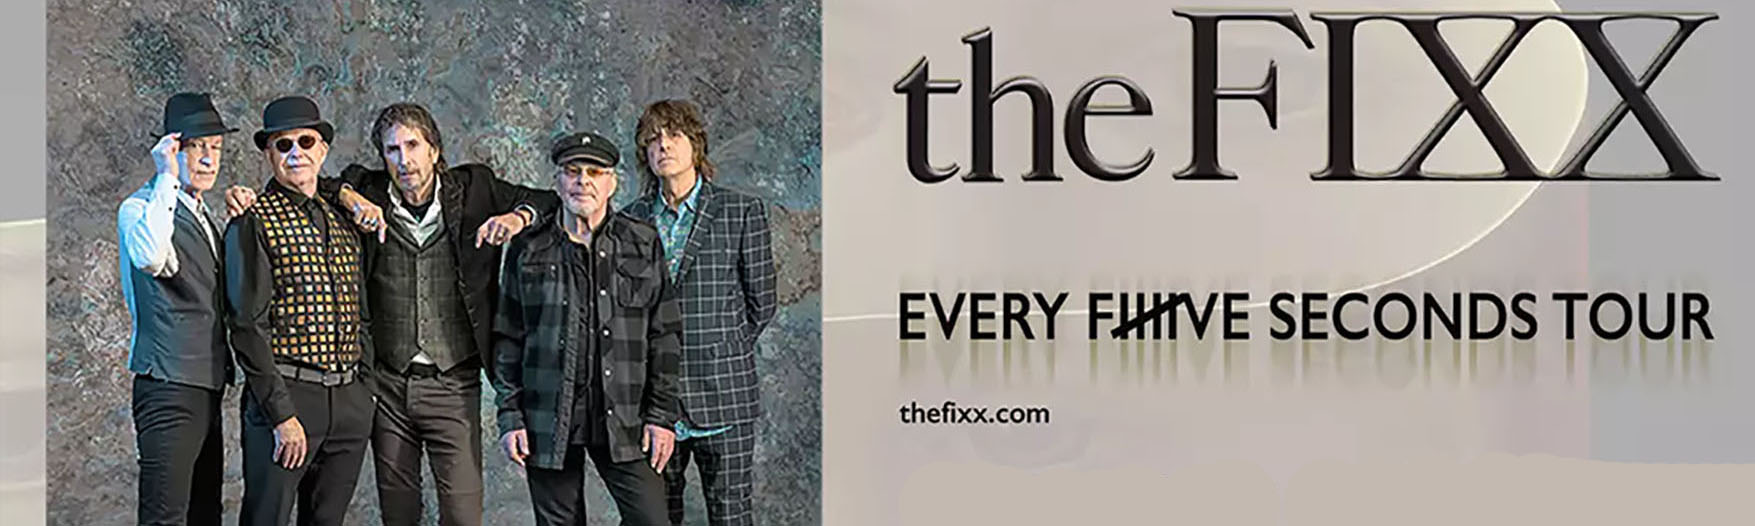 The Fixx Announce “Every Five Seconds Tour 2022”